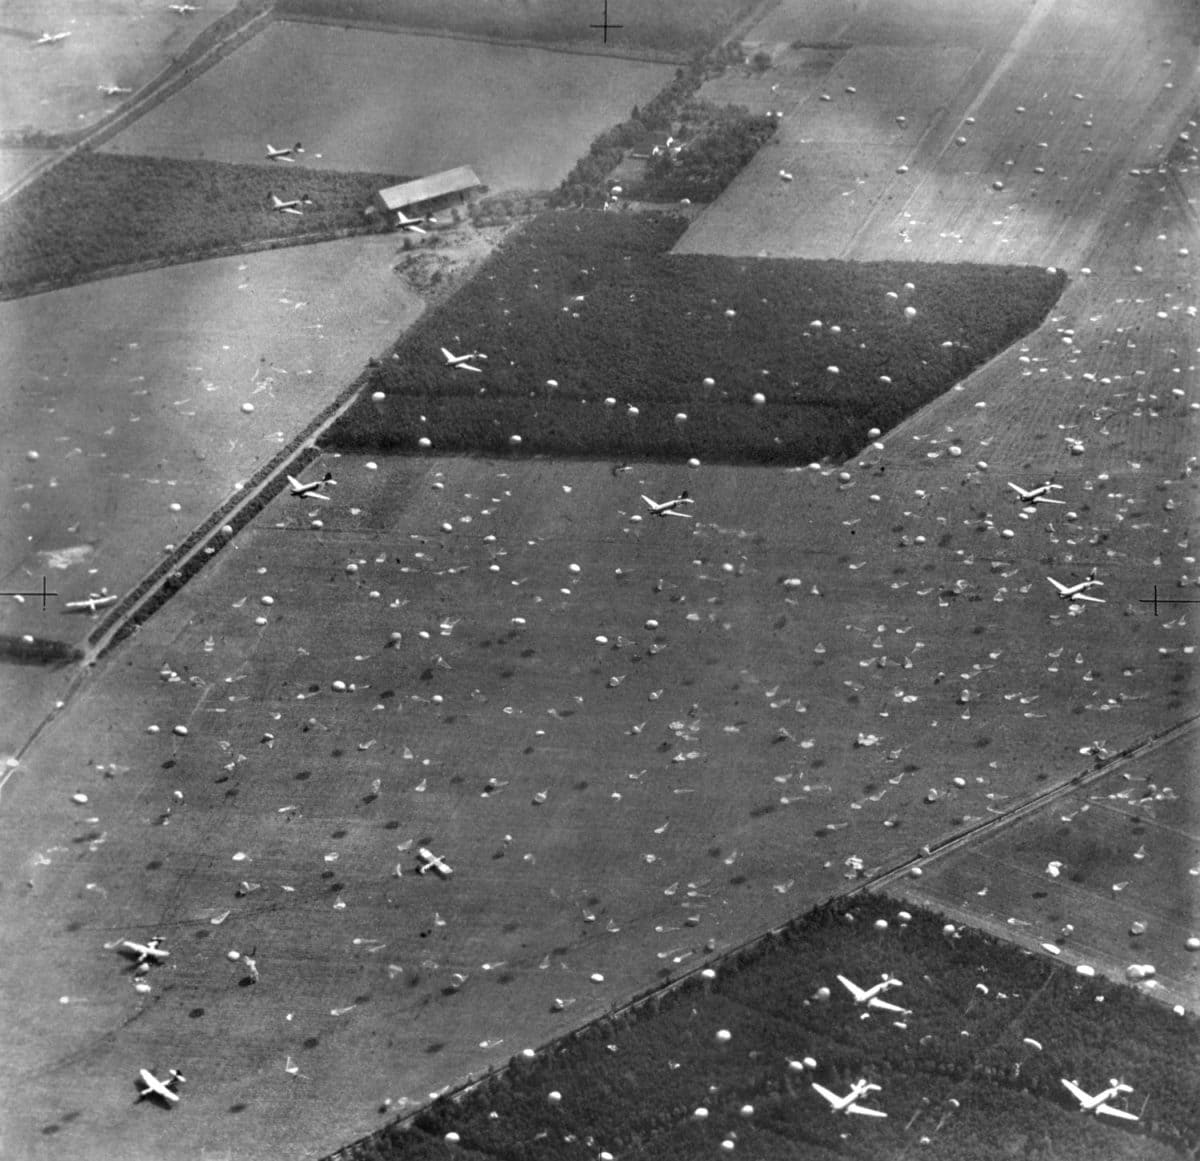 Allied planes drop paratroopers onto Holland's fields already dotted with gliders and airborne troops. Sept. 17, 1944. Field Marshall Montgomery's 'Operation Market Garden' plan to capture key bridges